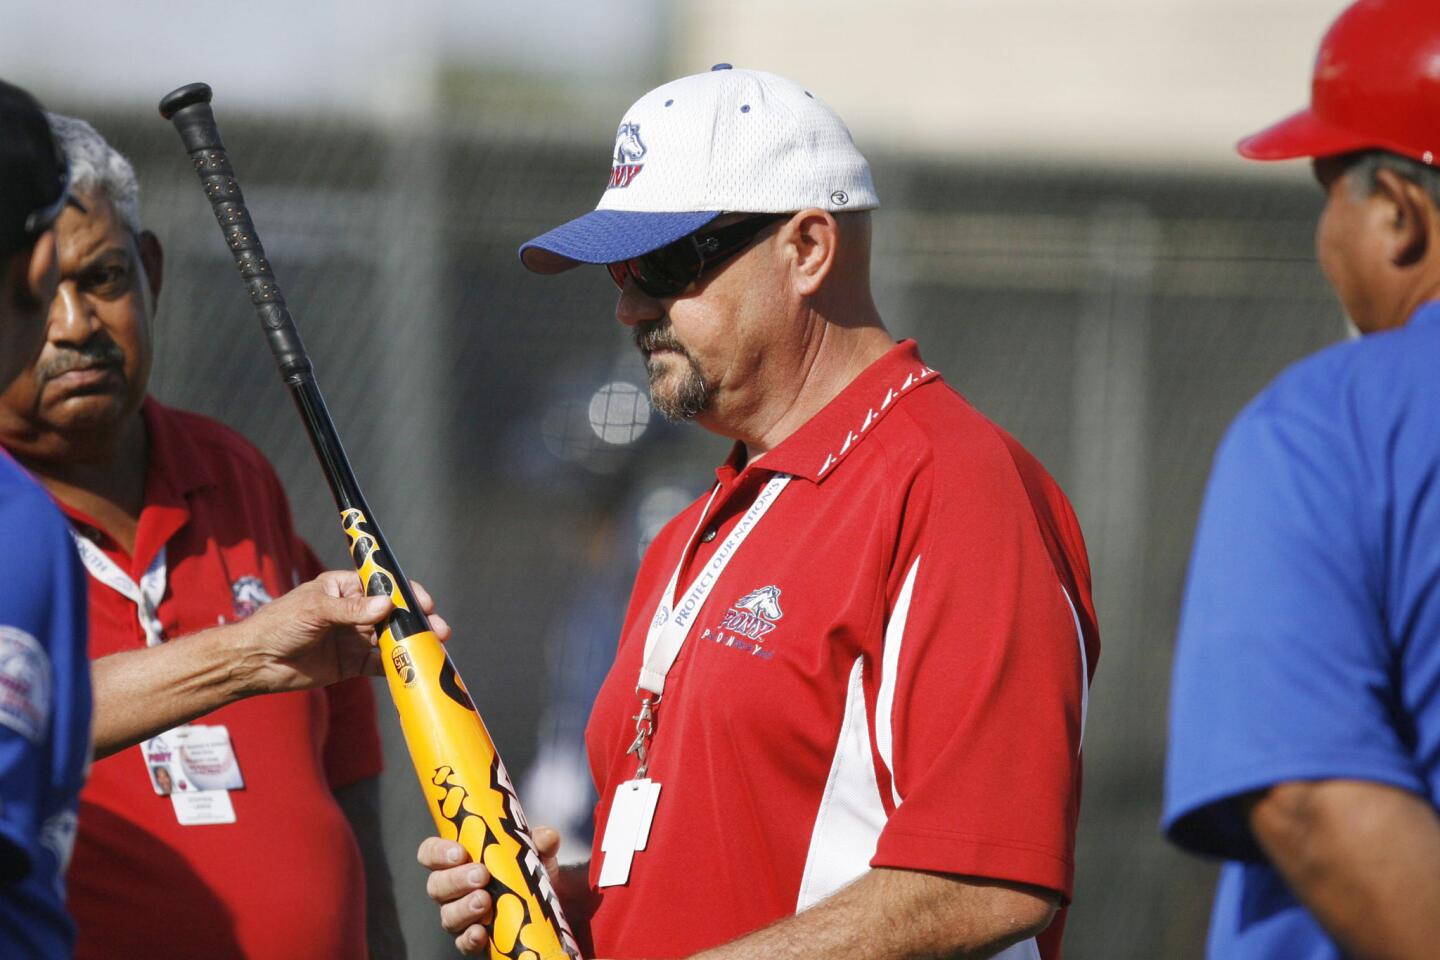 Puerto Rico talk to officials as they say Arroyo Seco is using an illegal bat during the game, which took place at Major League Baseball Urban Youth Academy in Compton on Thursday, August 3, 2012.